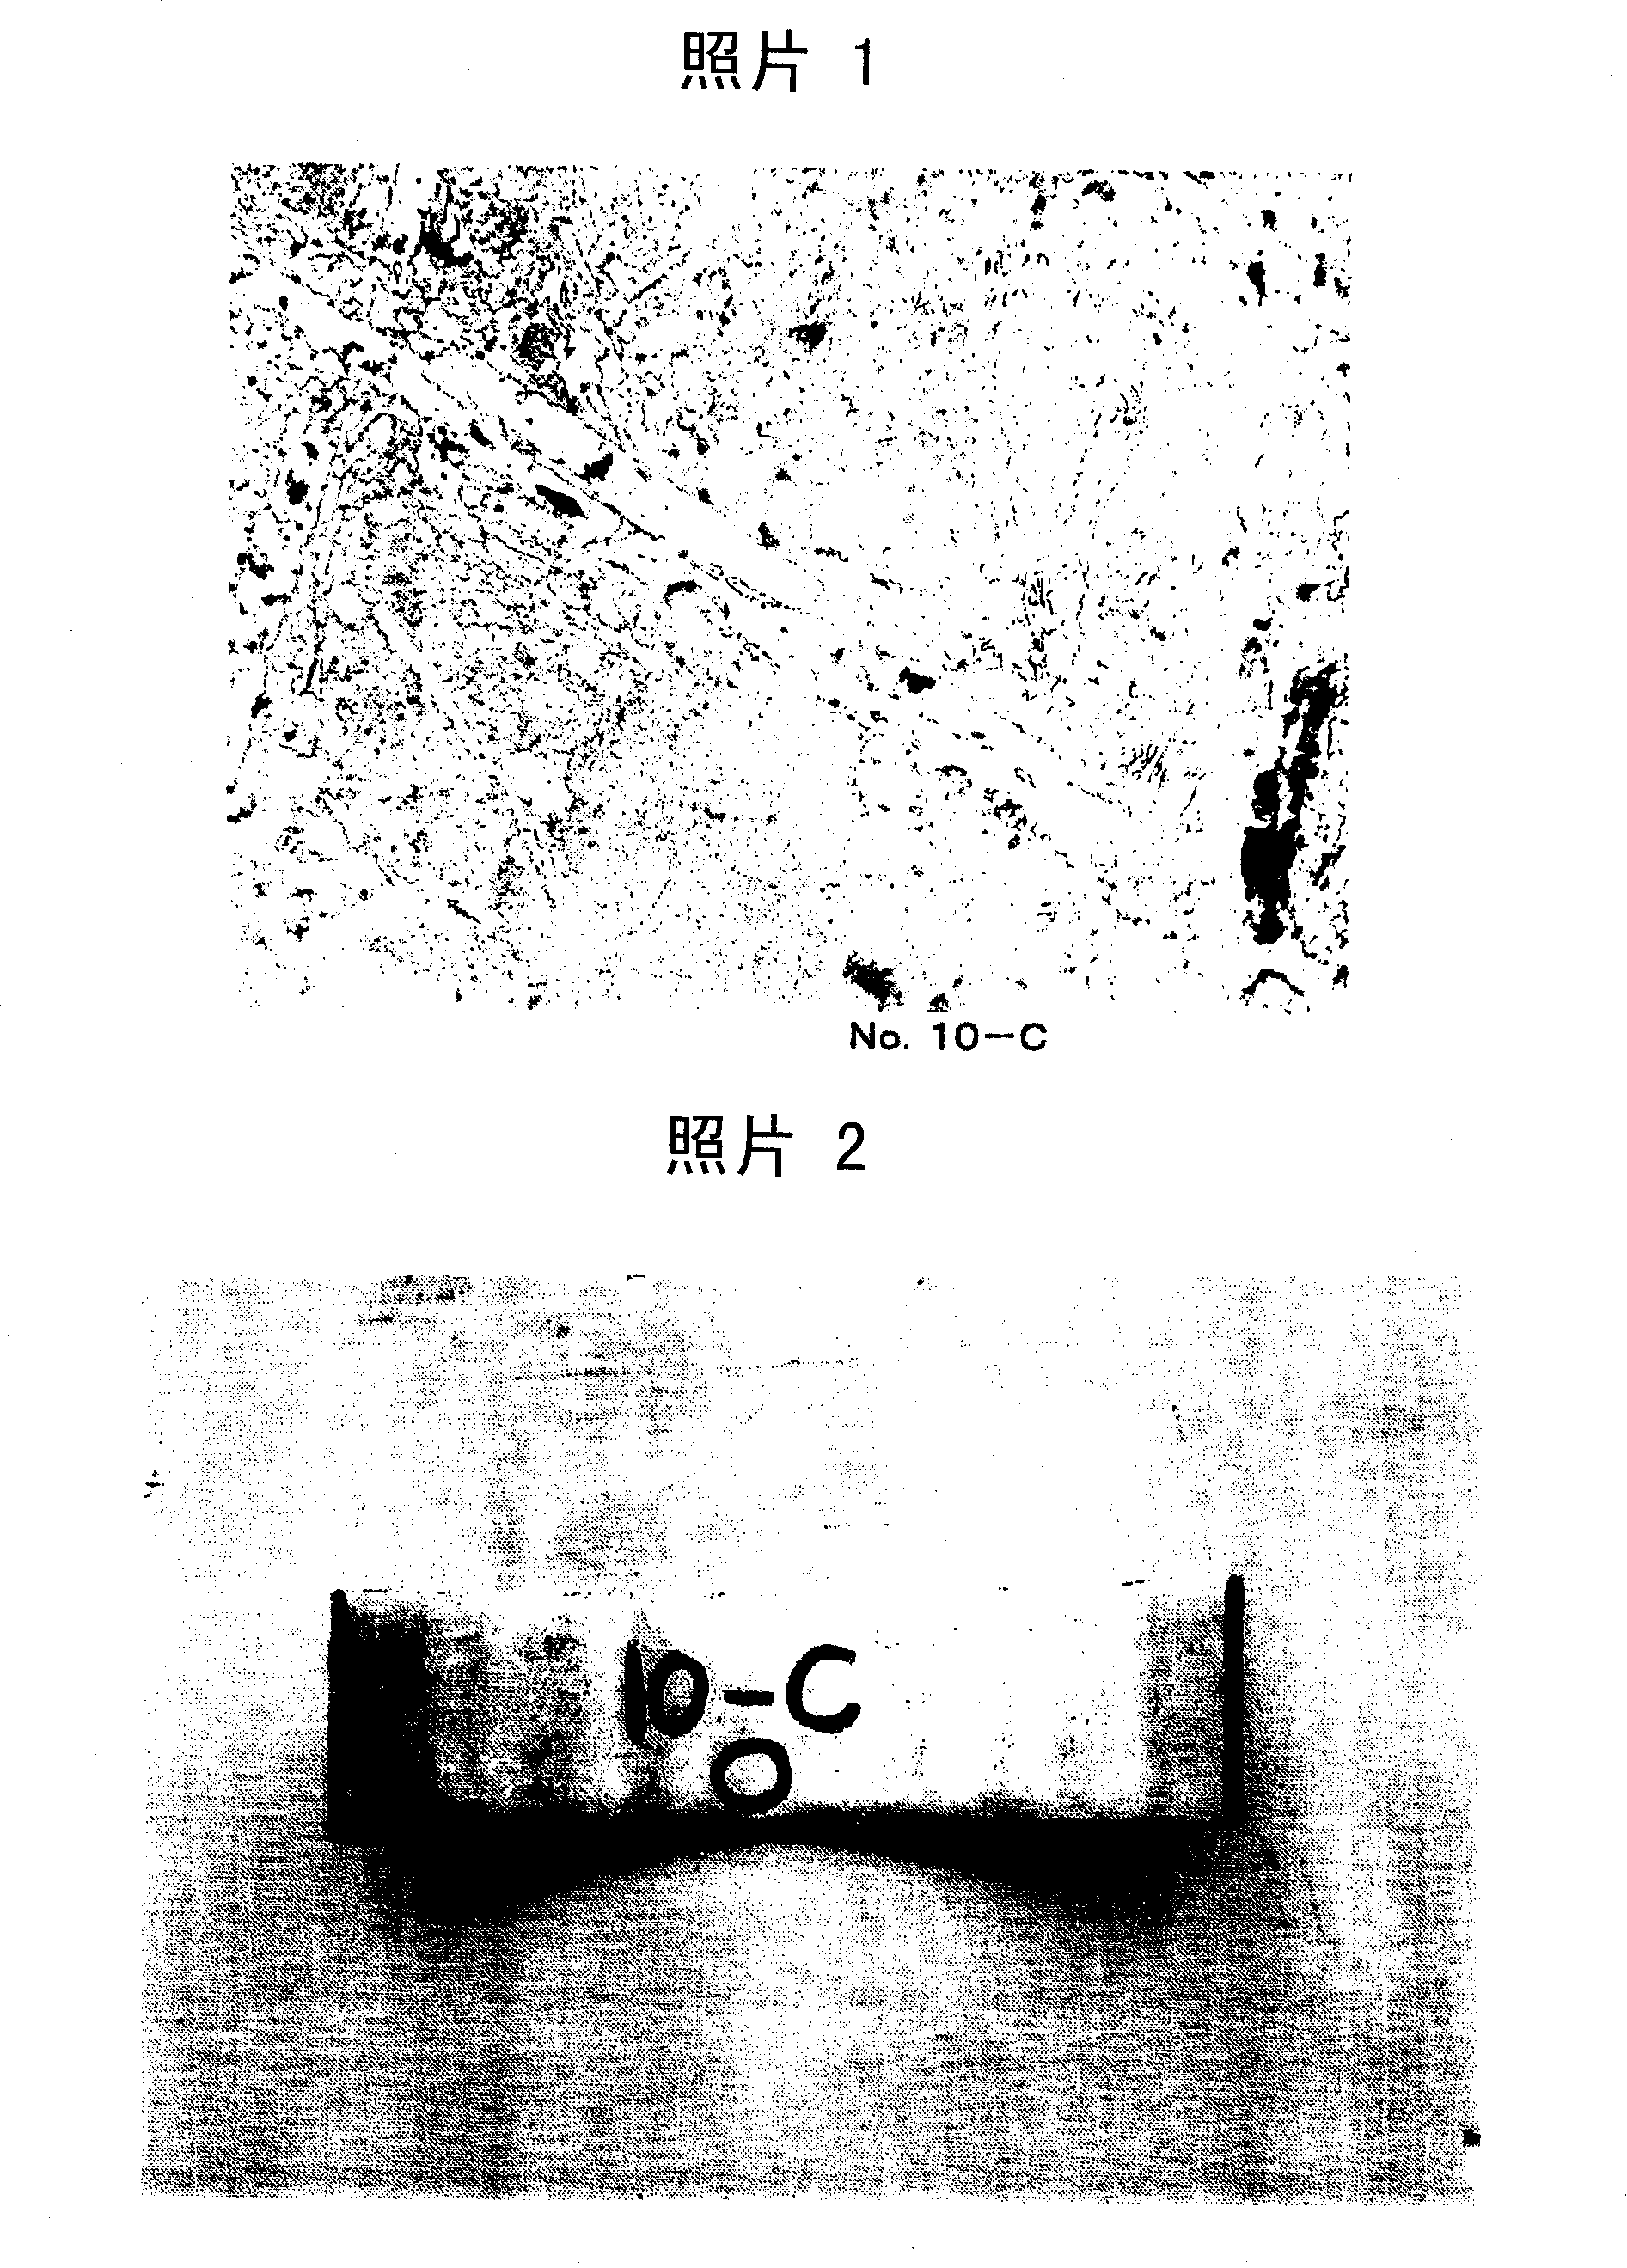 Iron-based corrosion resistant wear resistant alloy and deposit welding material for obtaining the alloy